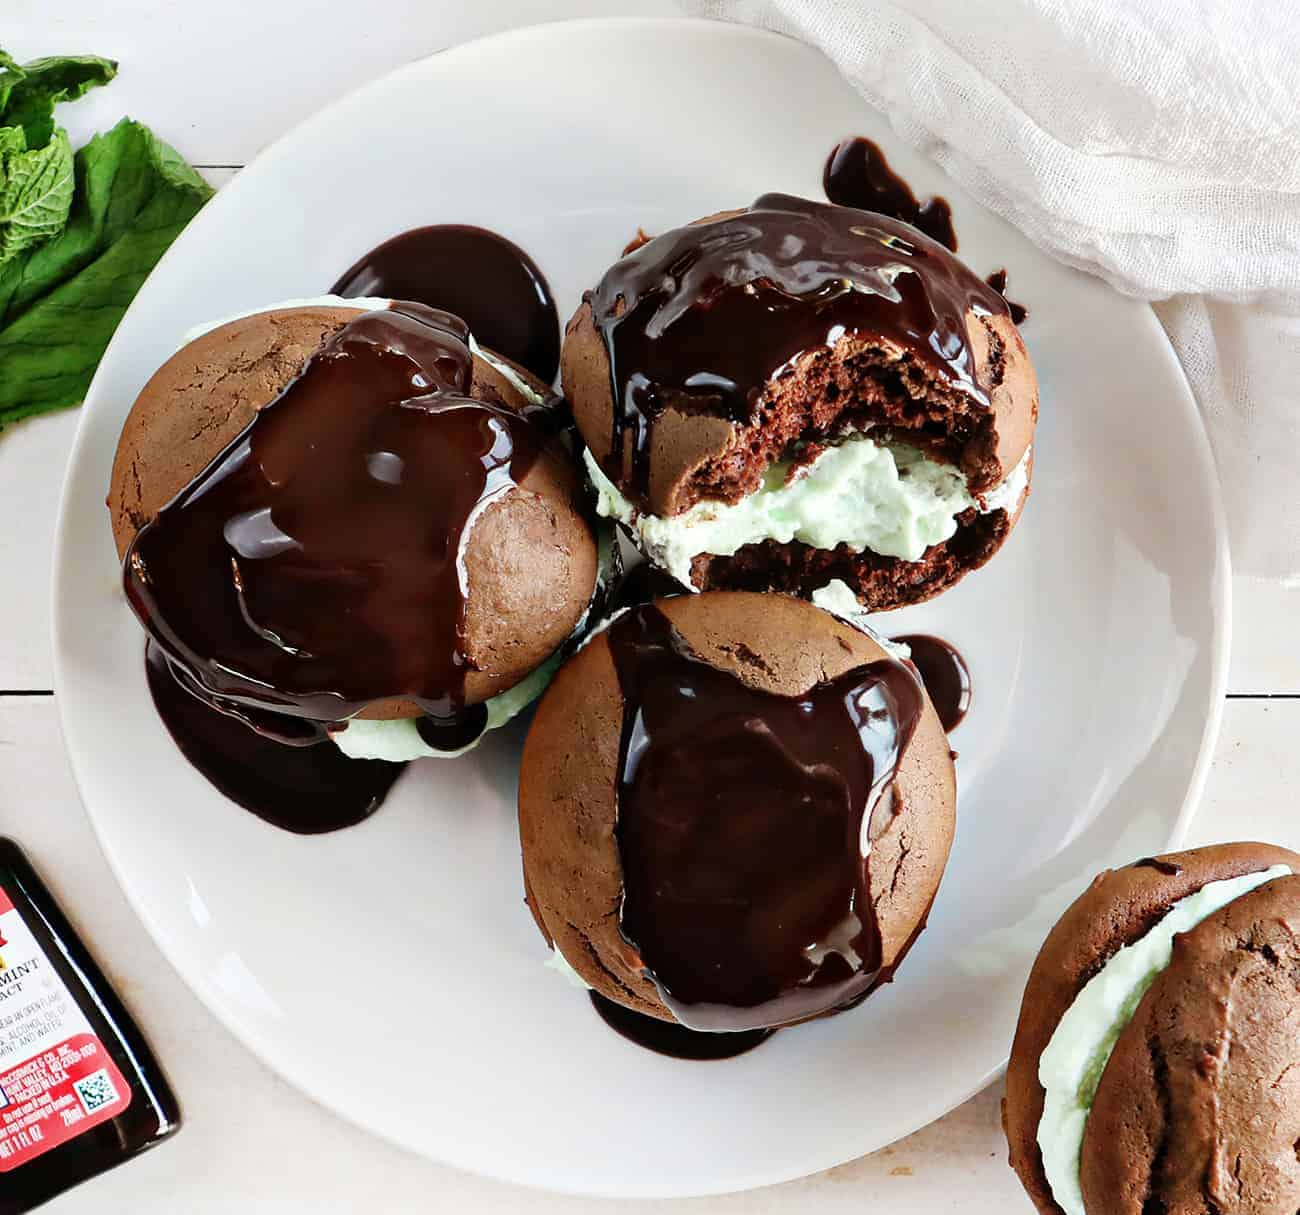 Plate of Peppermint Whoopie Pies covered in Chocolate Sauce